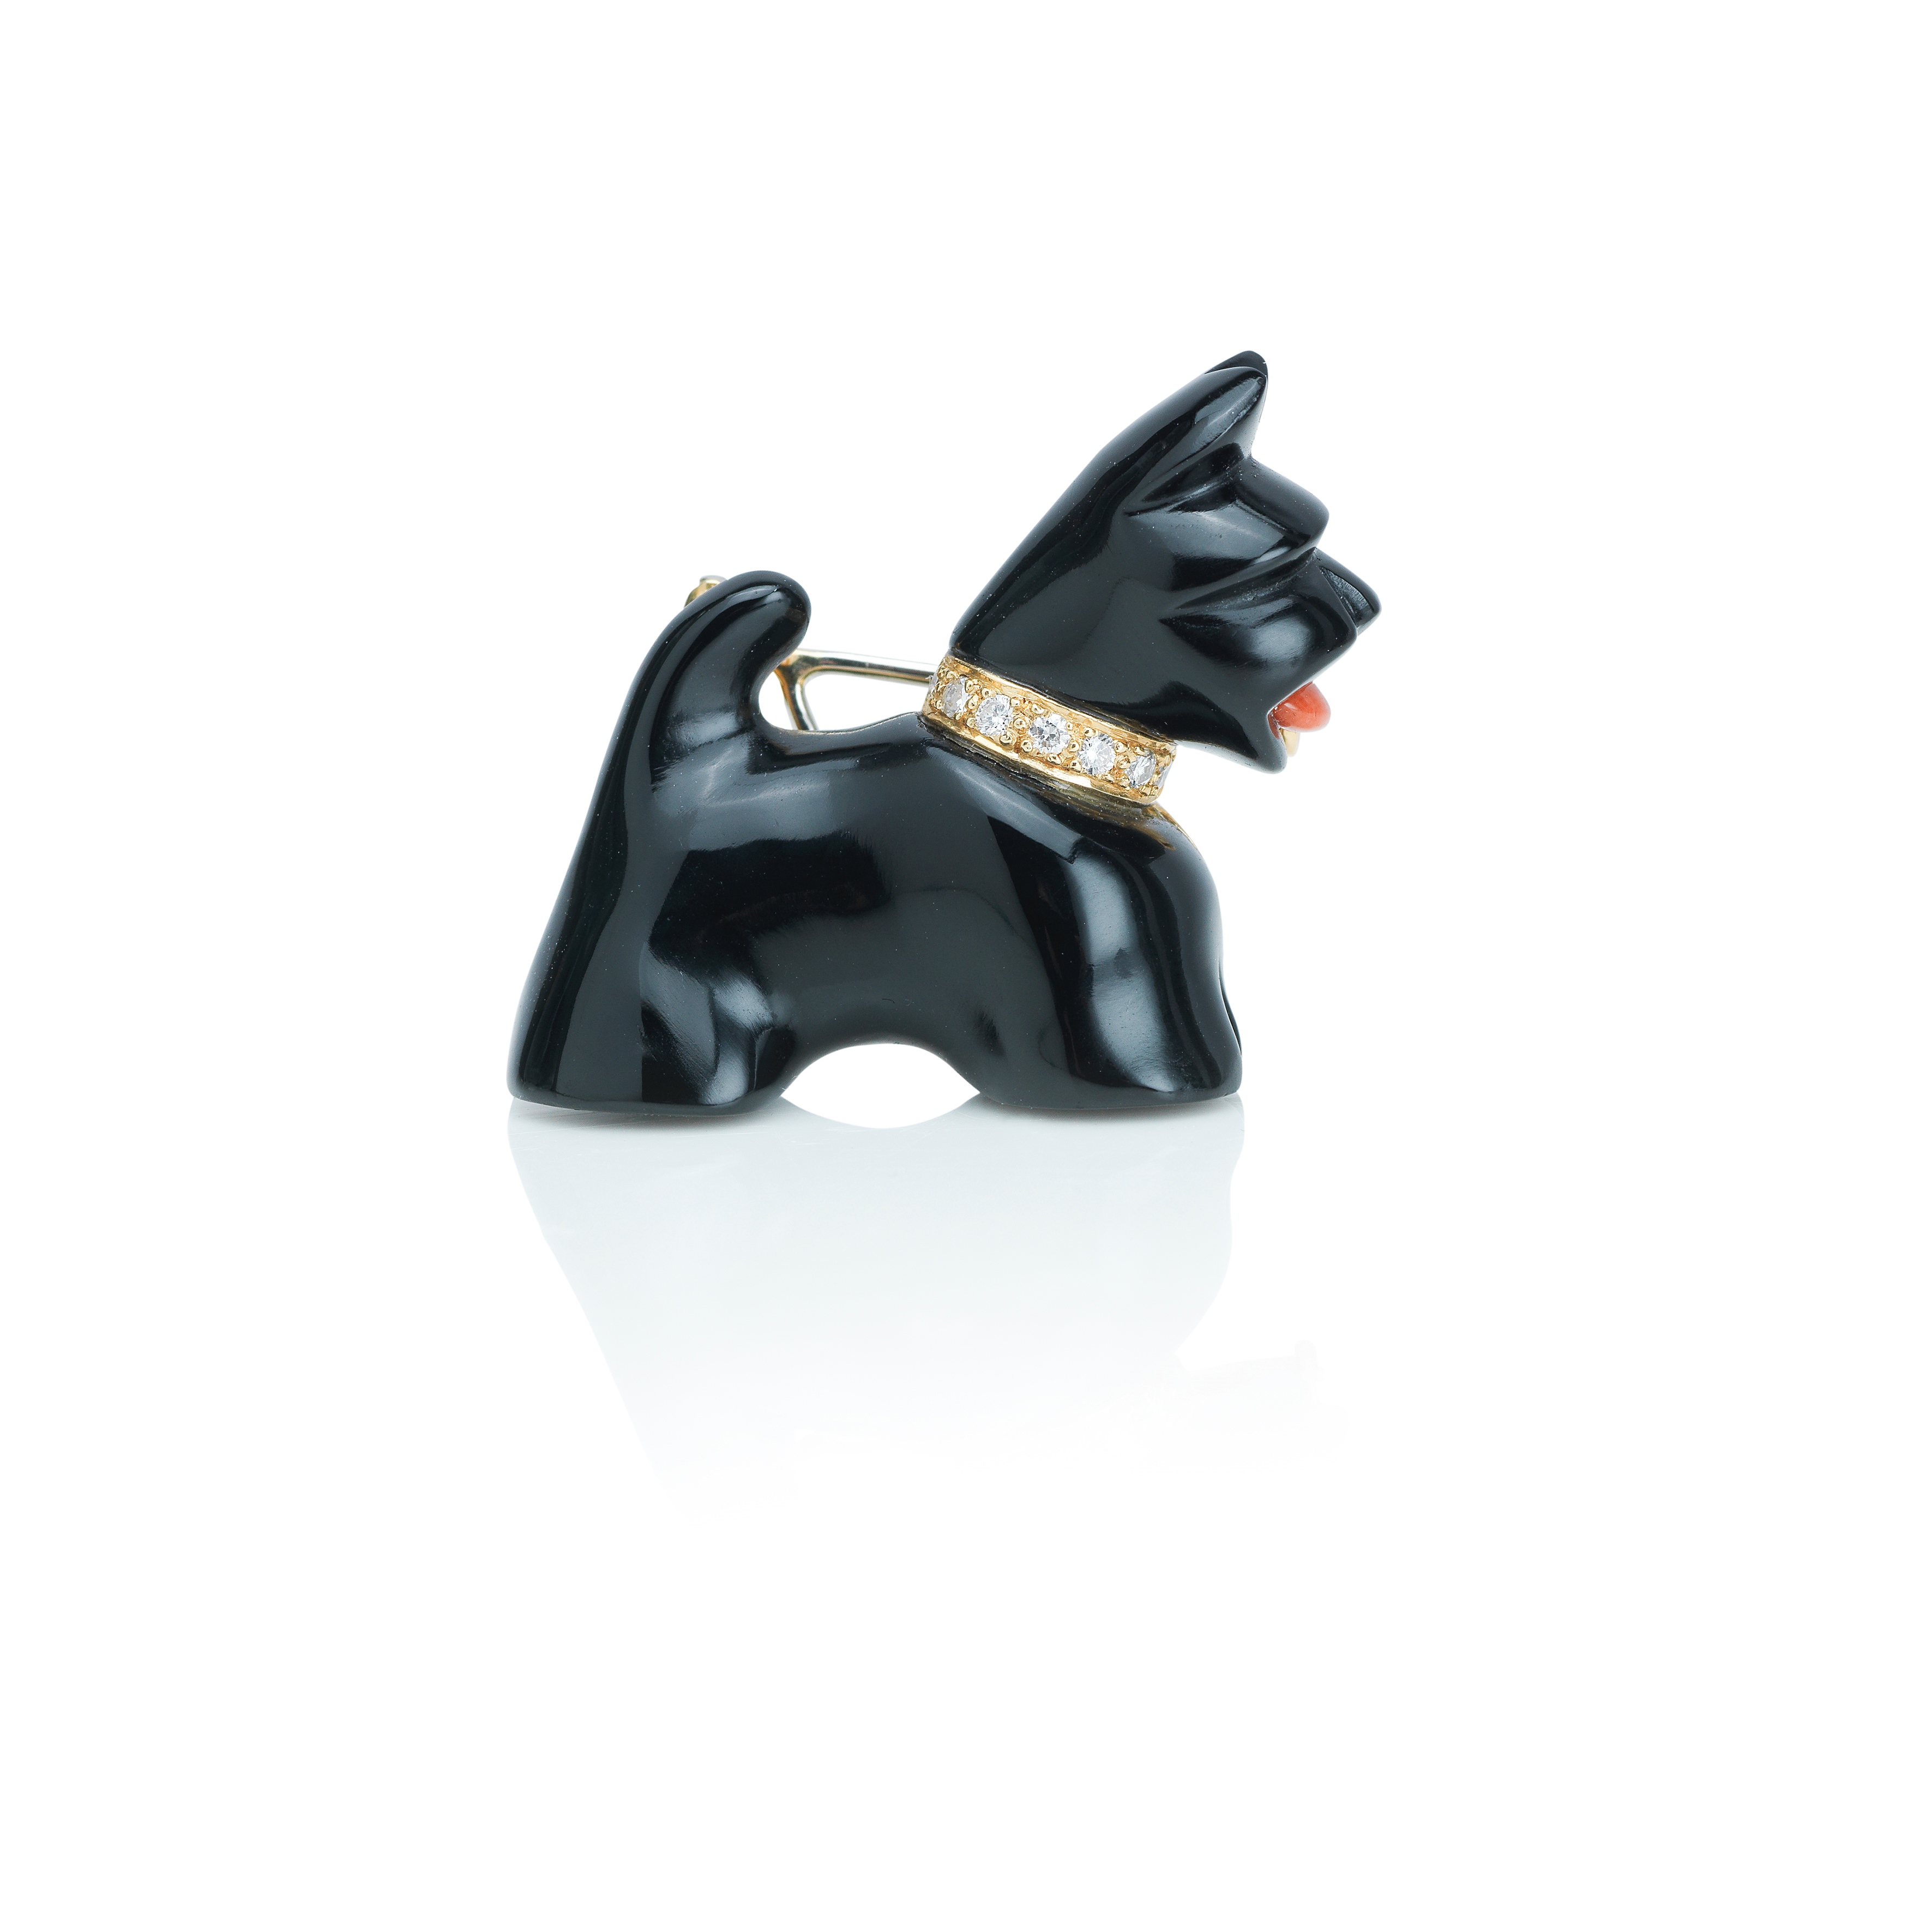 Click to see full size: An onyx and gem-set scottie dog brooch